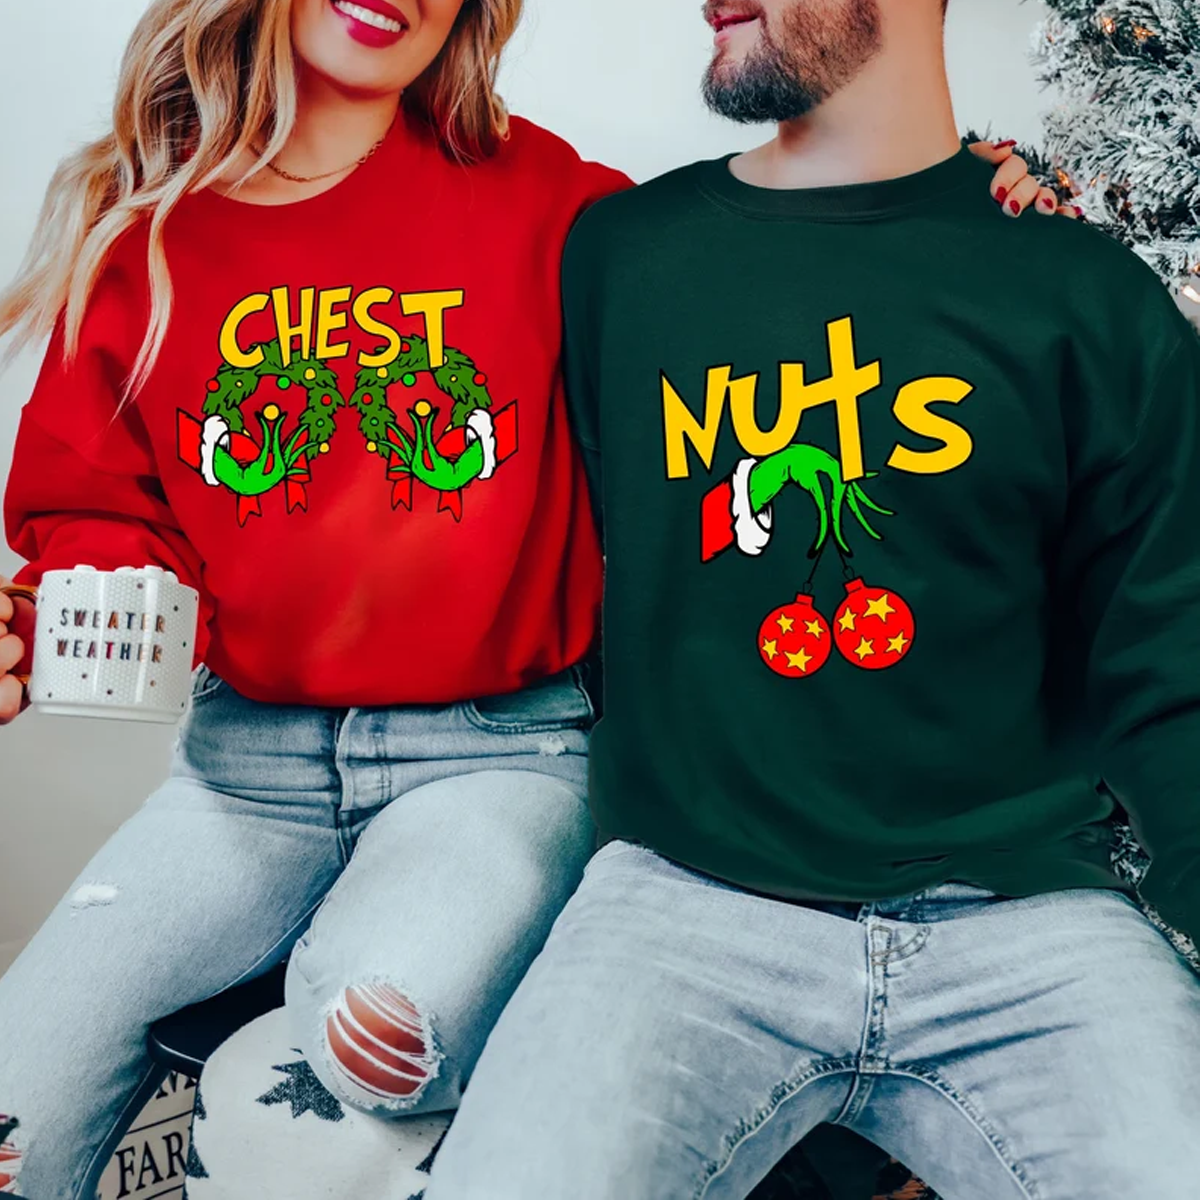 Chest Nuts - Couple Matching Christmas Jumper Sweater